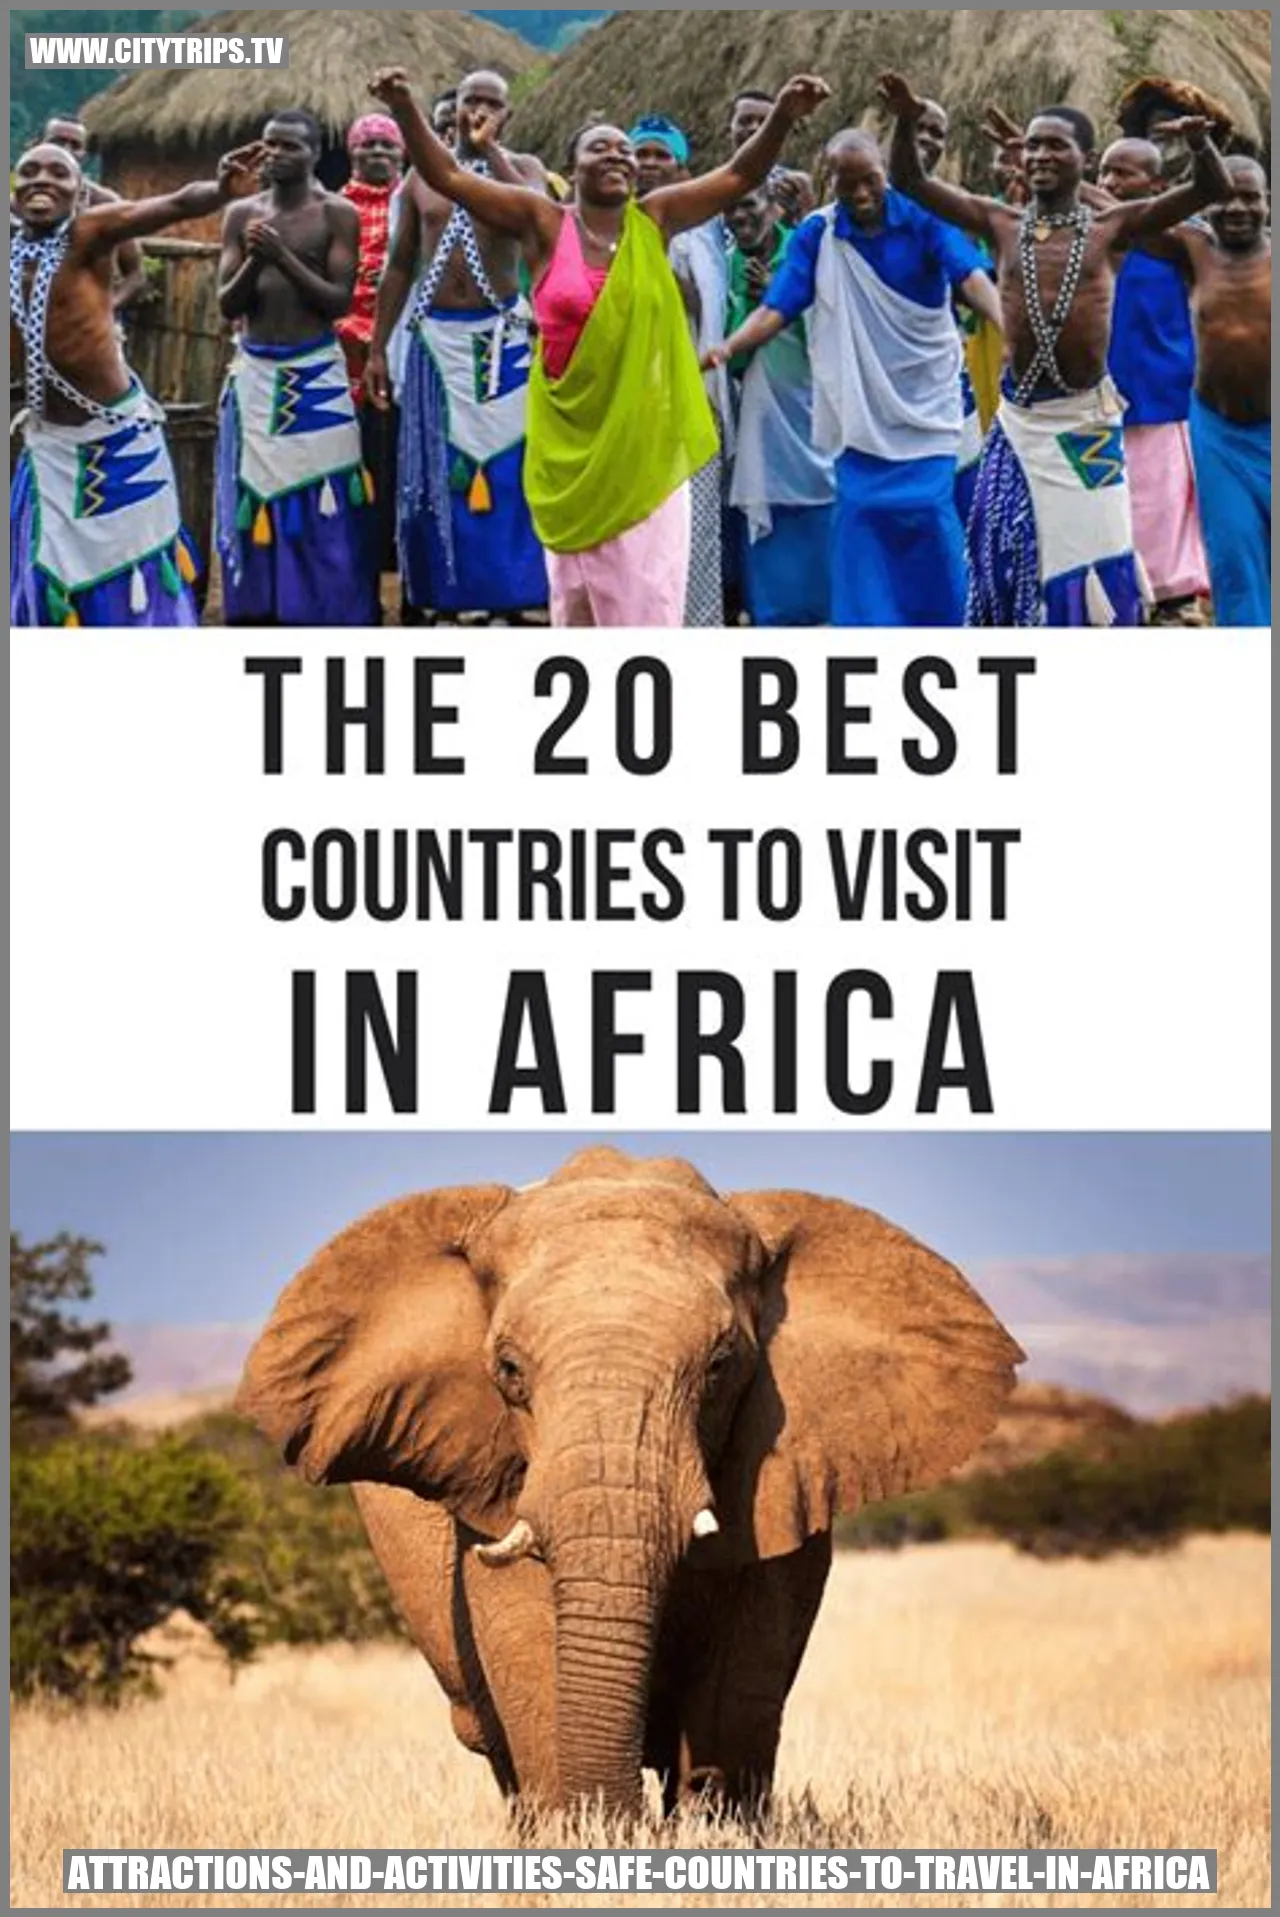 Attractions and Activities in Africa